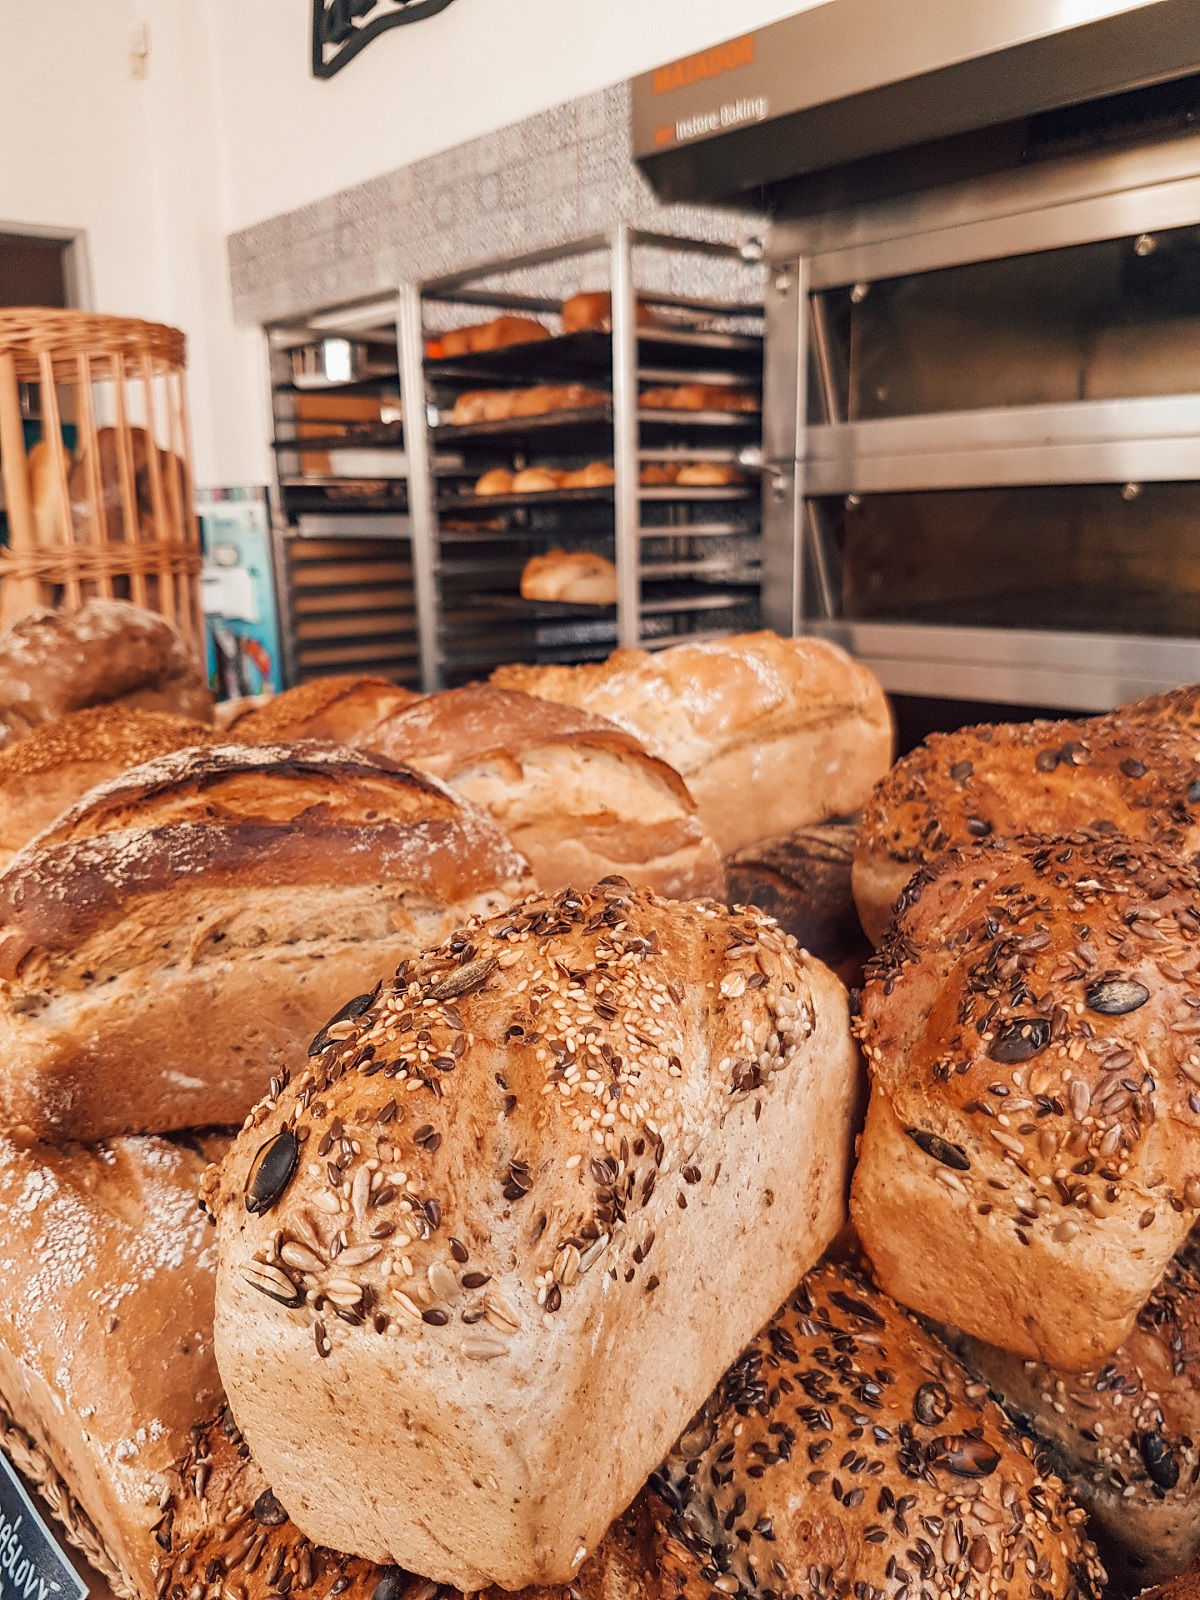 Bakery with many different types of loaves